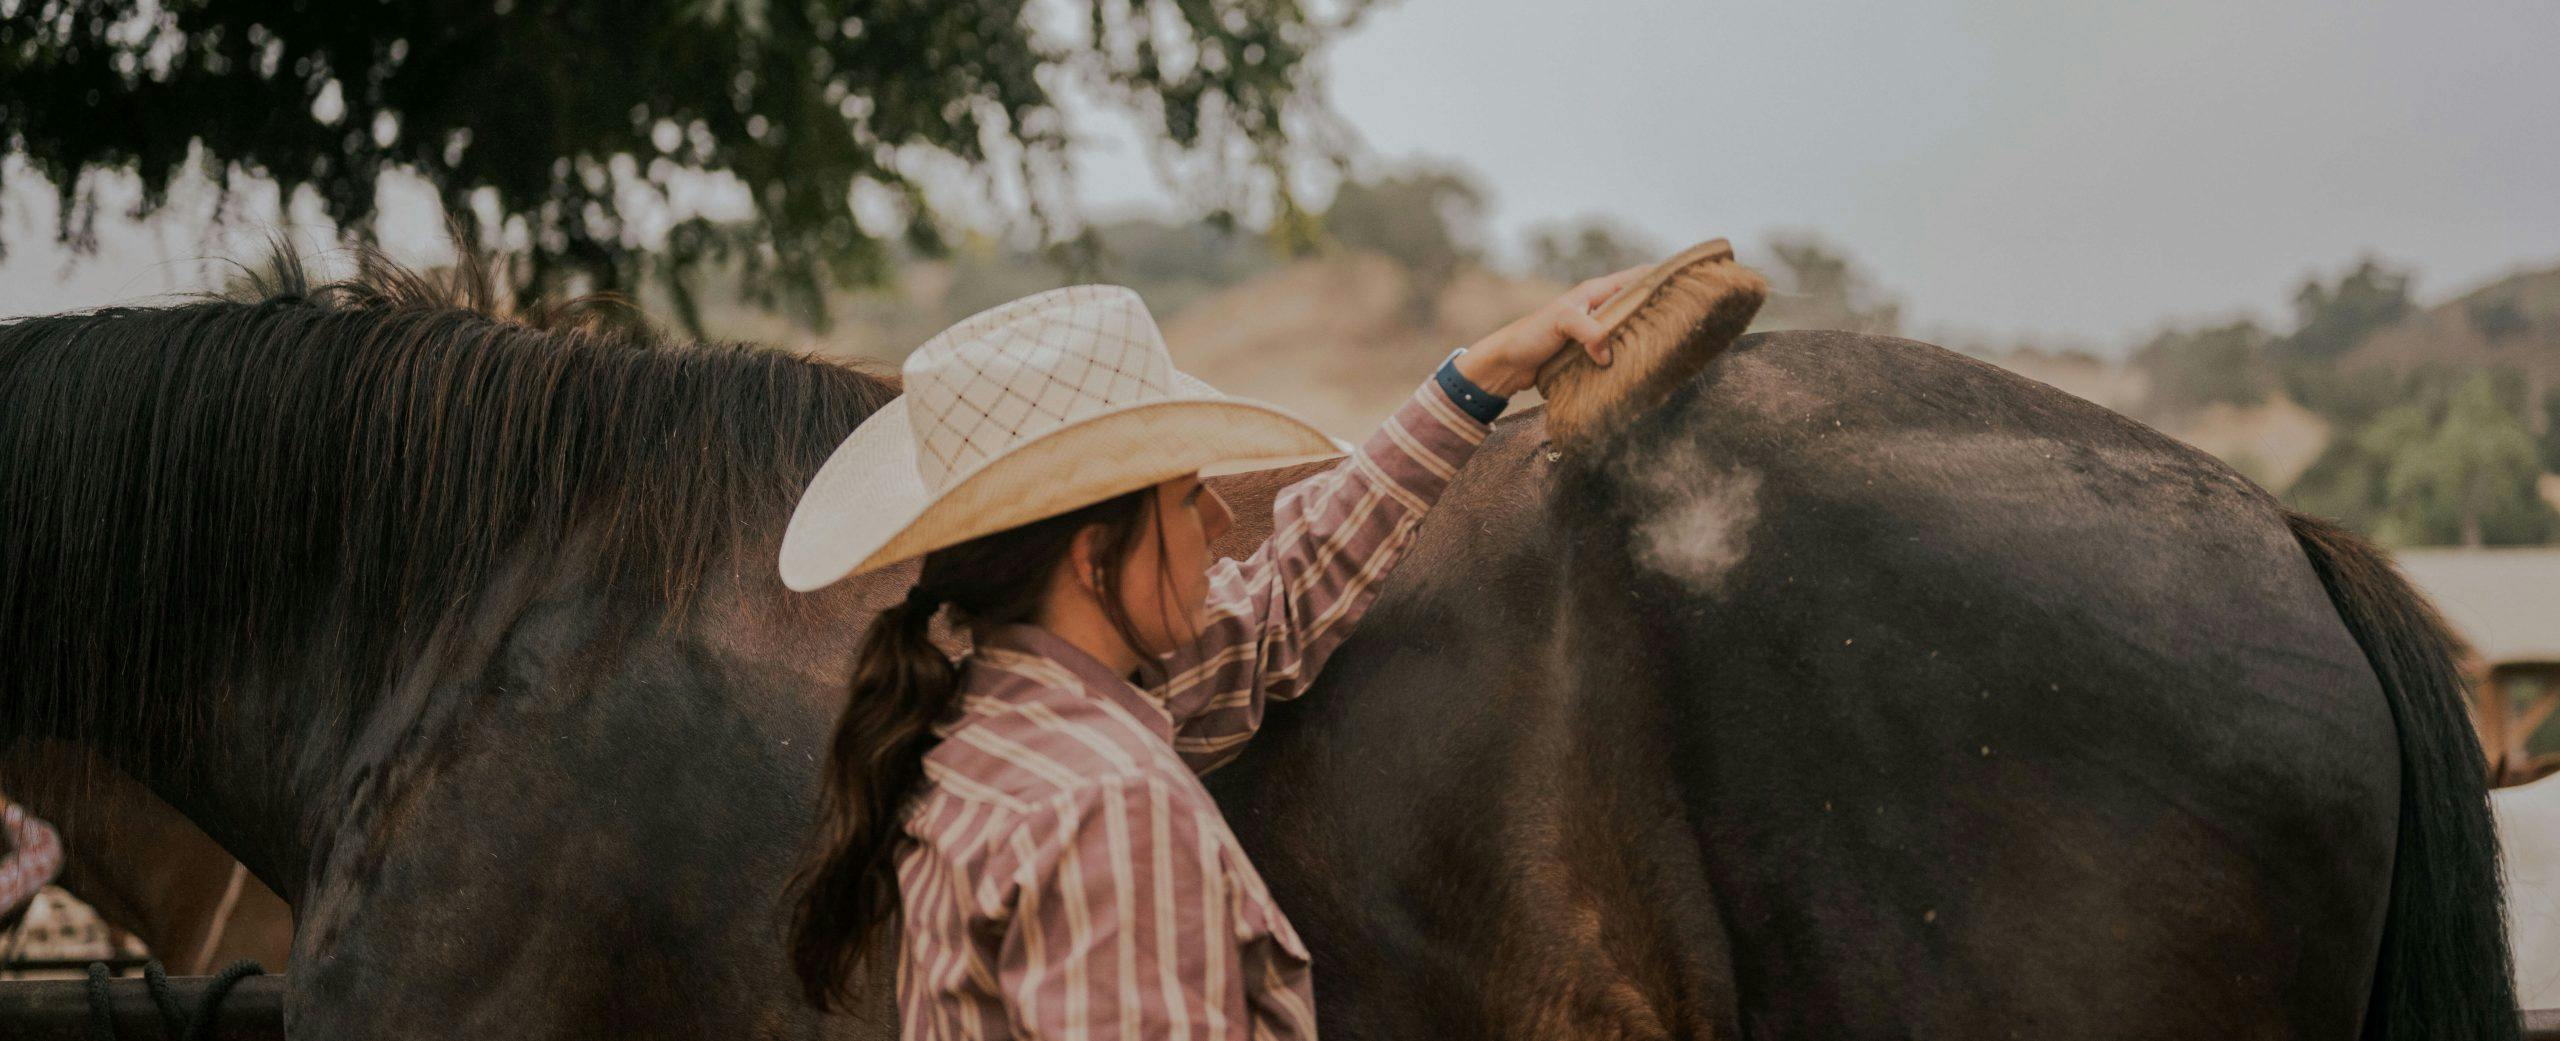 person brushing a horse